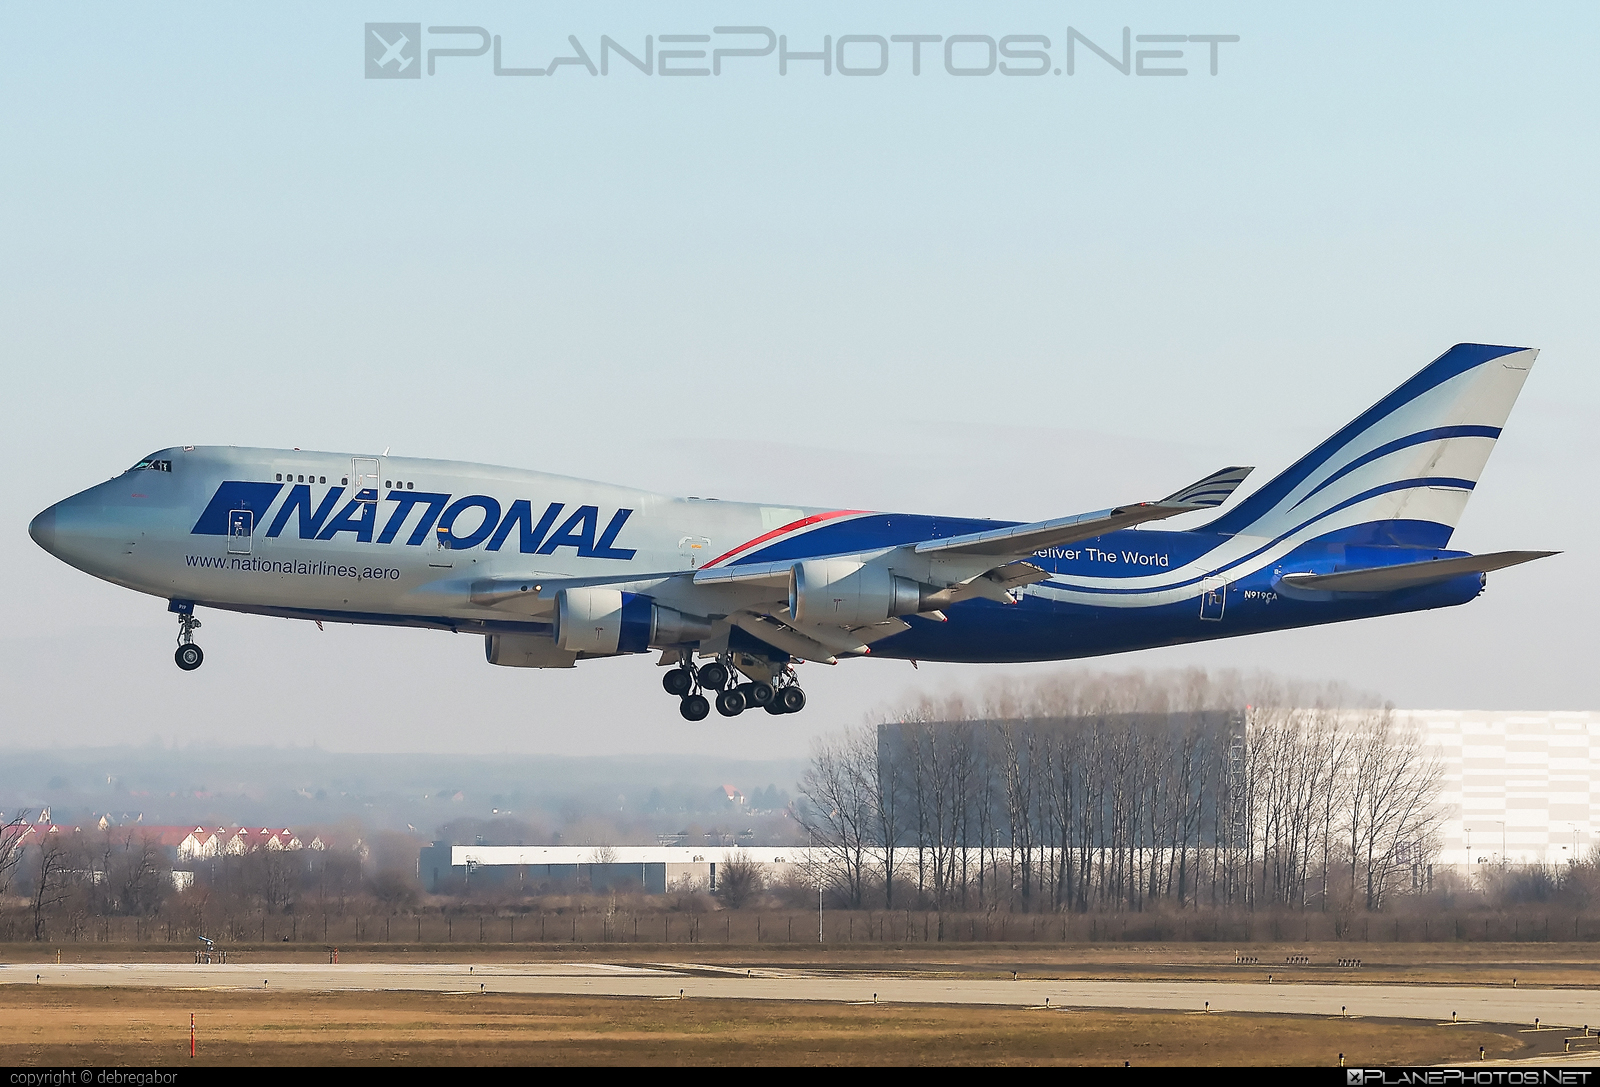 Boeing 747-400BCF - N919CA operated by National Airlines #b747 #b747bcf #boeing #boeing747 #boeingconvertedfreighter #jumbo